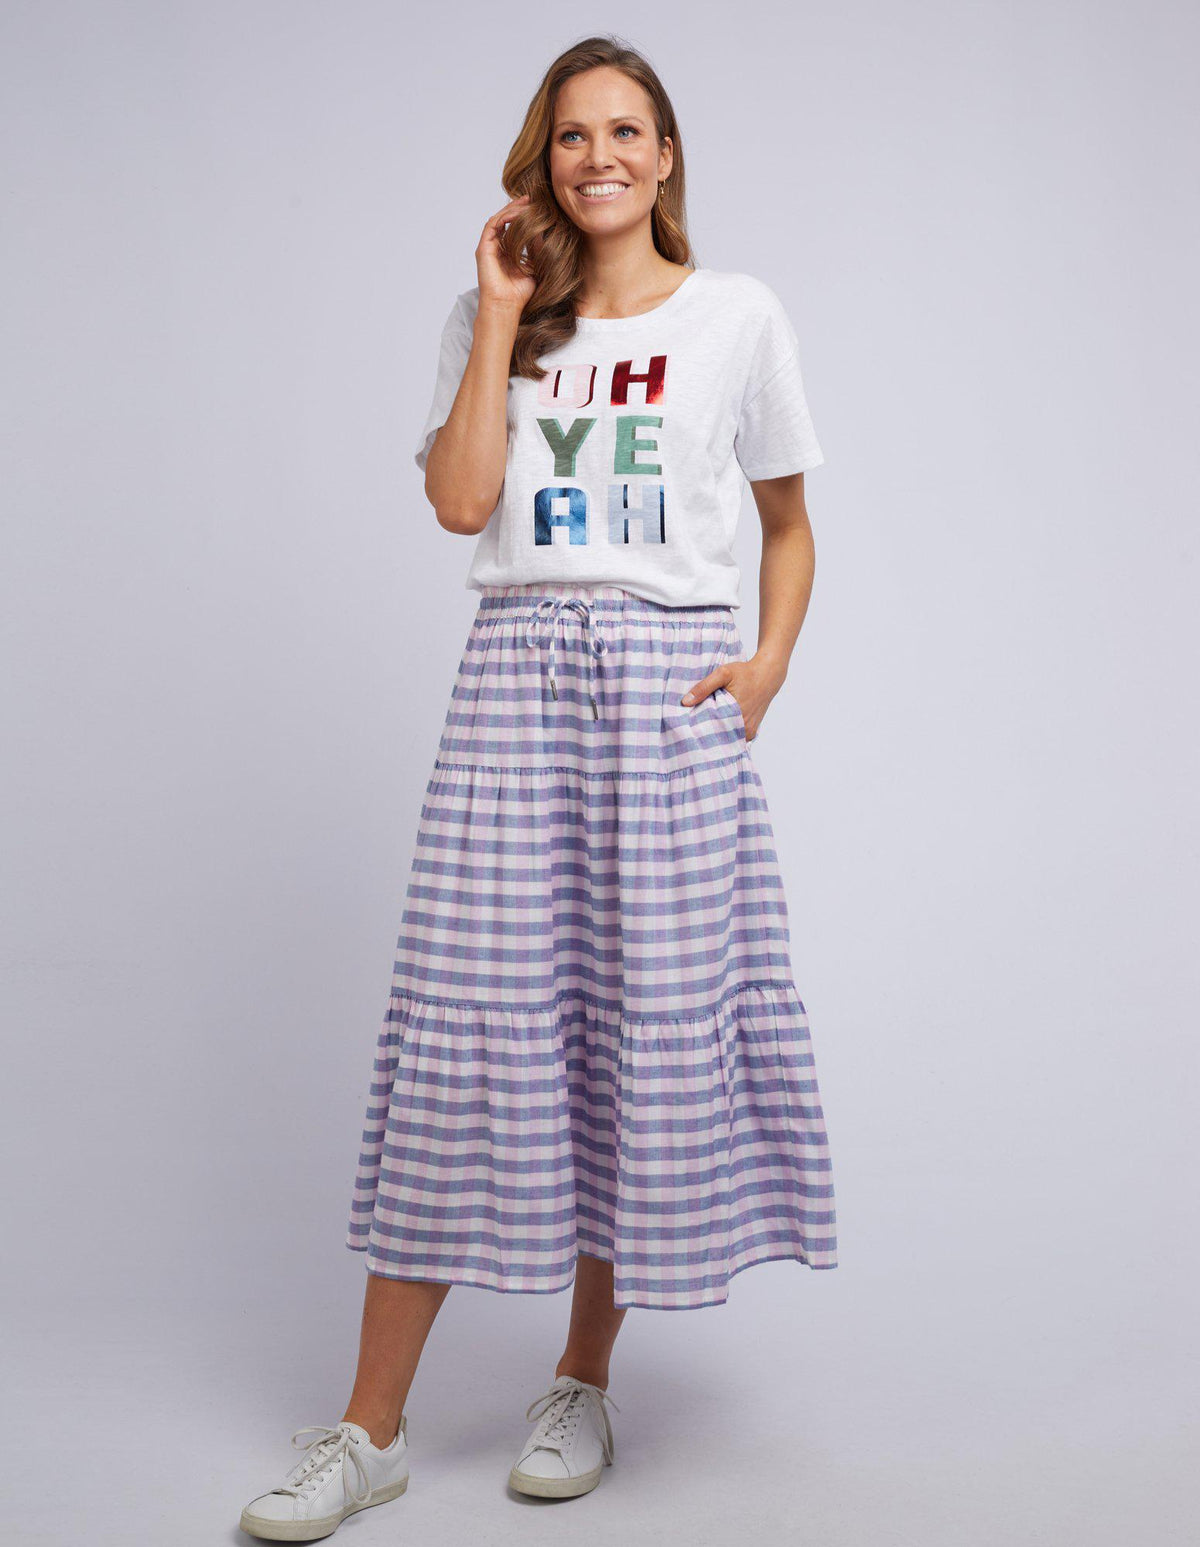 Gracie Tiered Skirt - Pink And Blue Check - Elm Lifestyle - FUDGE Gifts Home Lifestyle